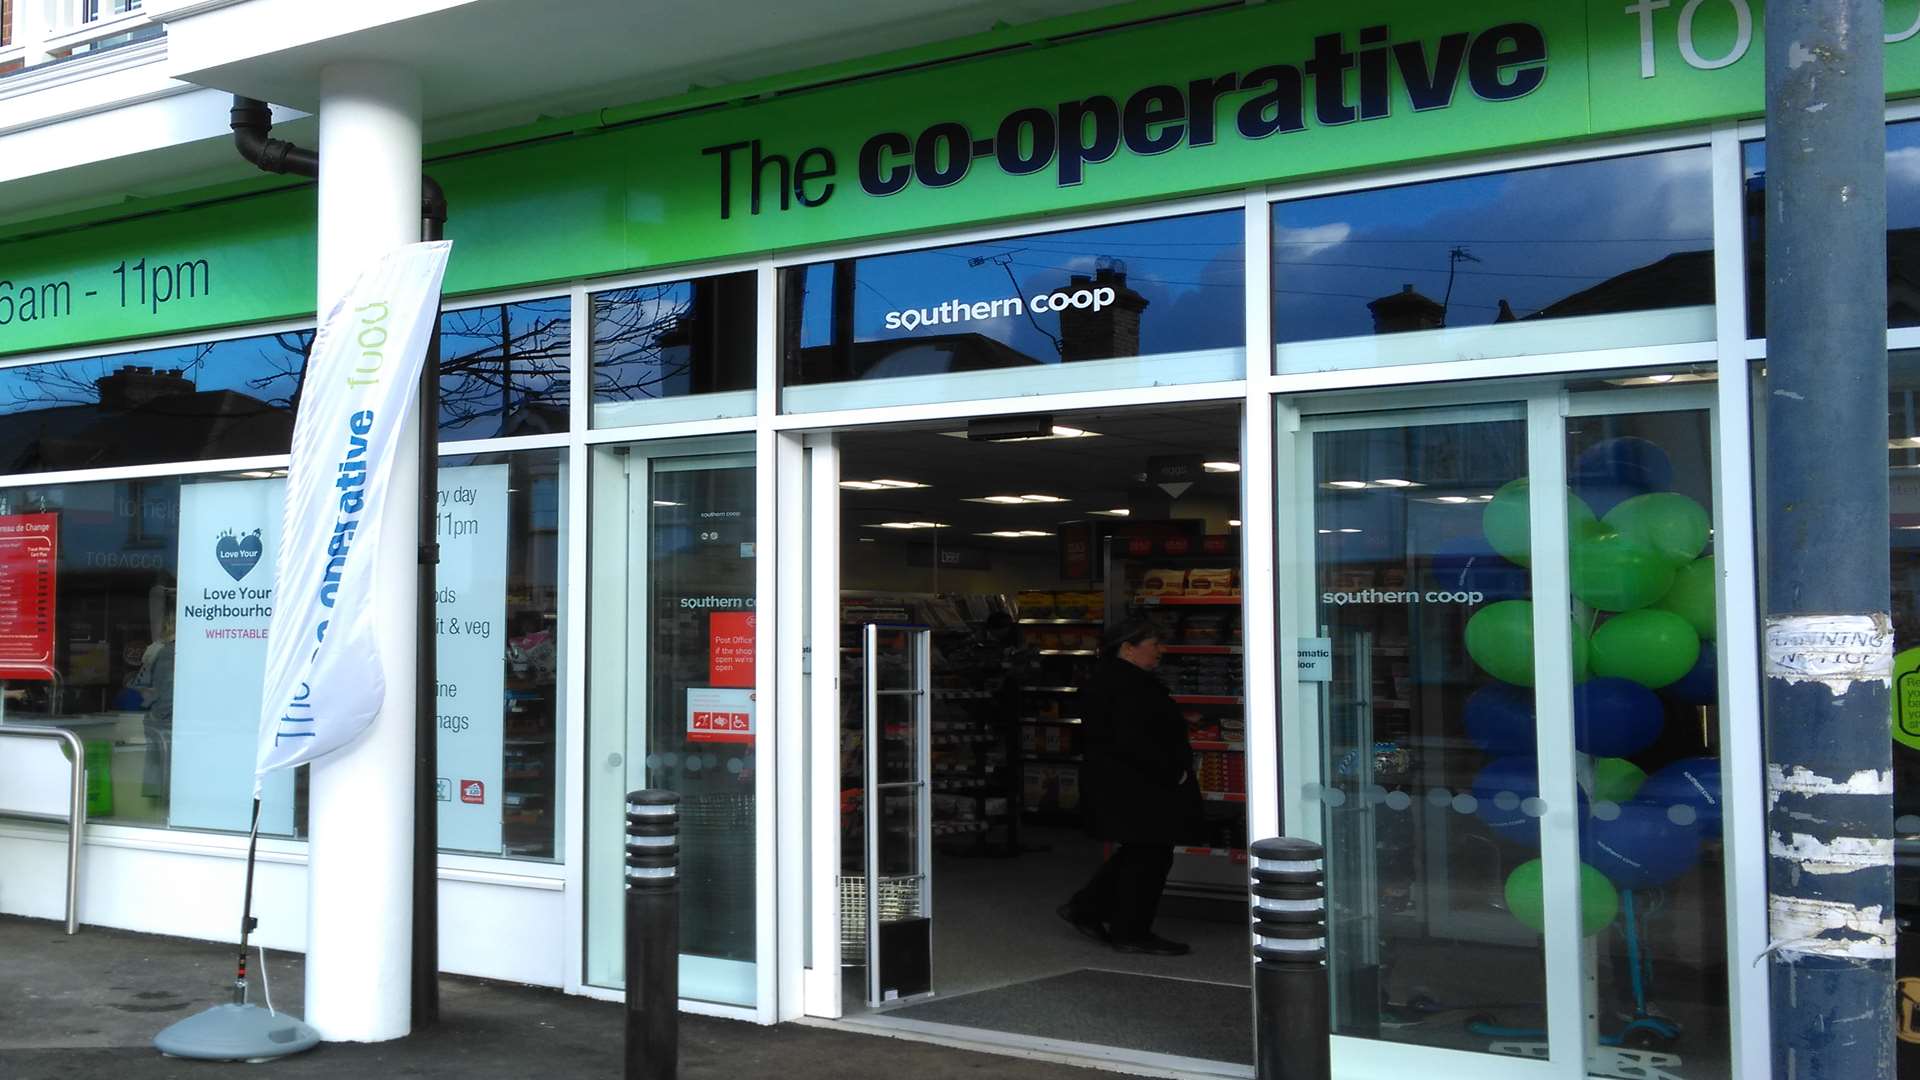 The Co-Op in Cromwell Road was opened earlier today